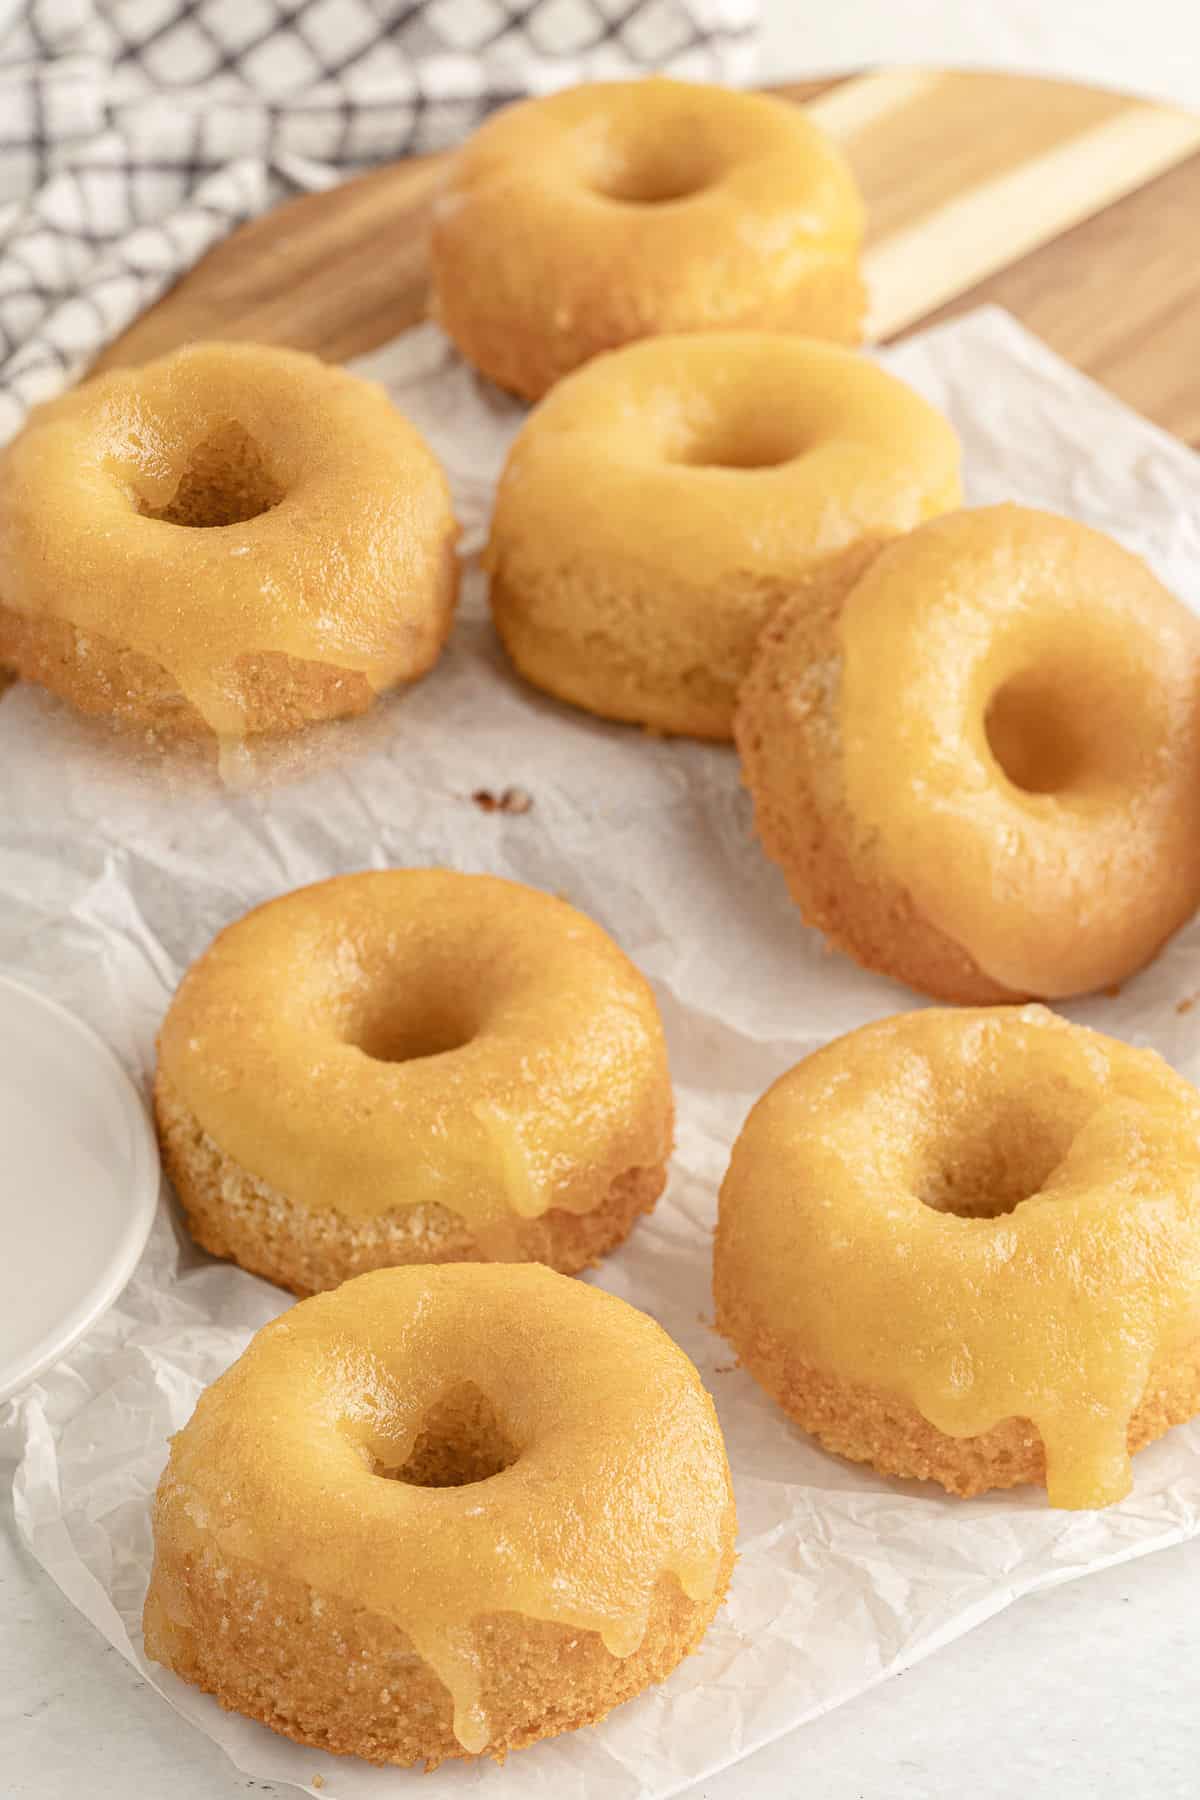 low carb glazed donuts piled up on white parchment paper